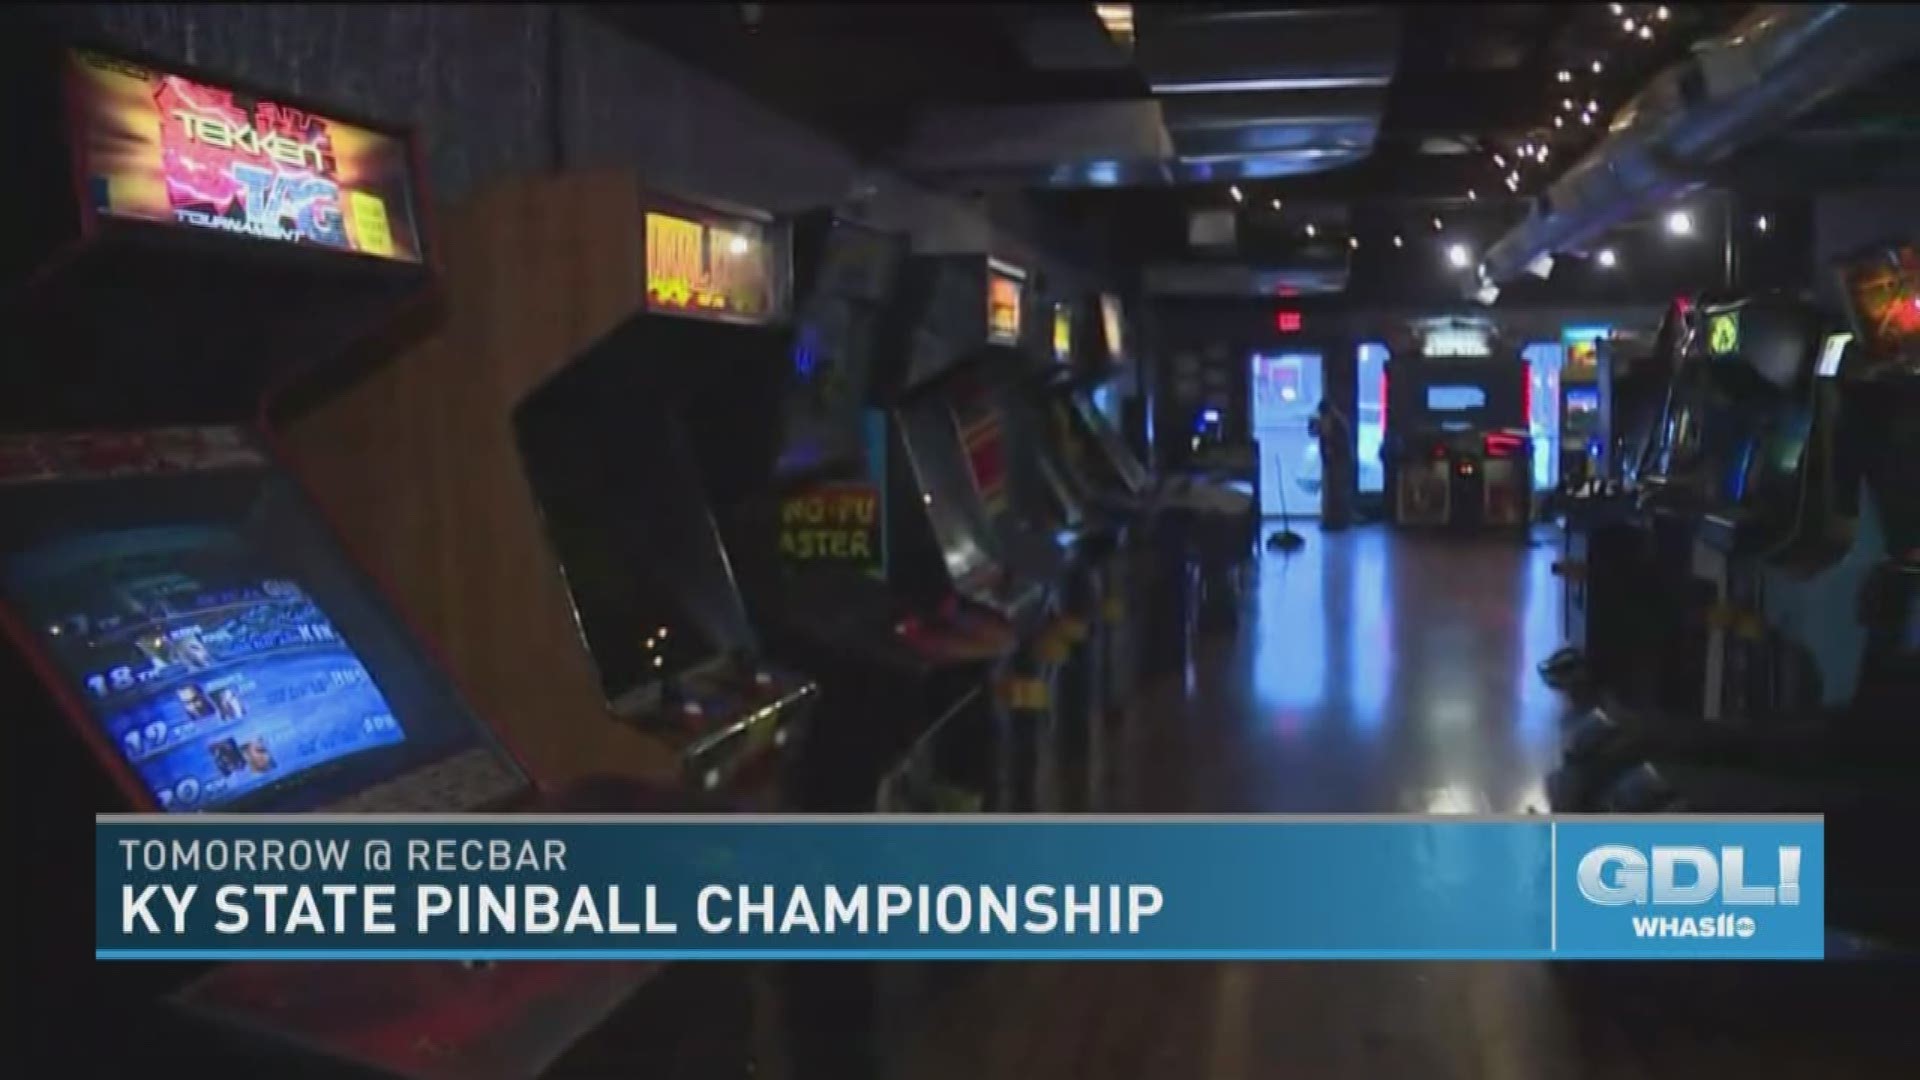 The Kentucky State Pinball Championship is coming to Recbar, which is located at 10301 Taylorsville Road in Louisville, KY.